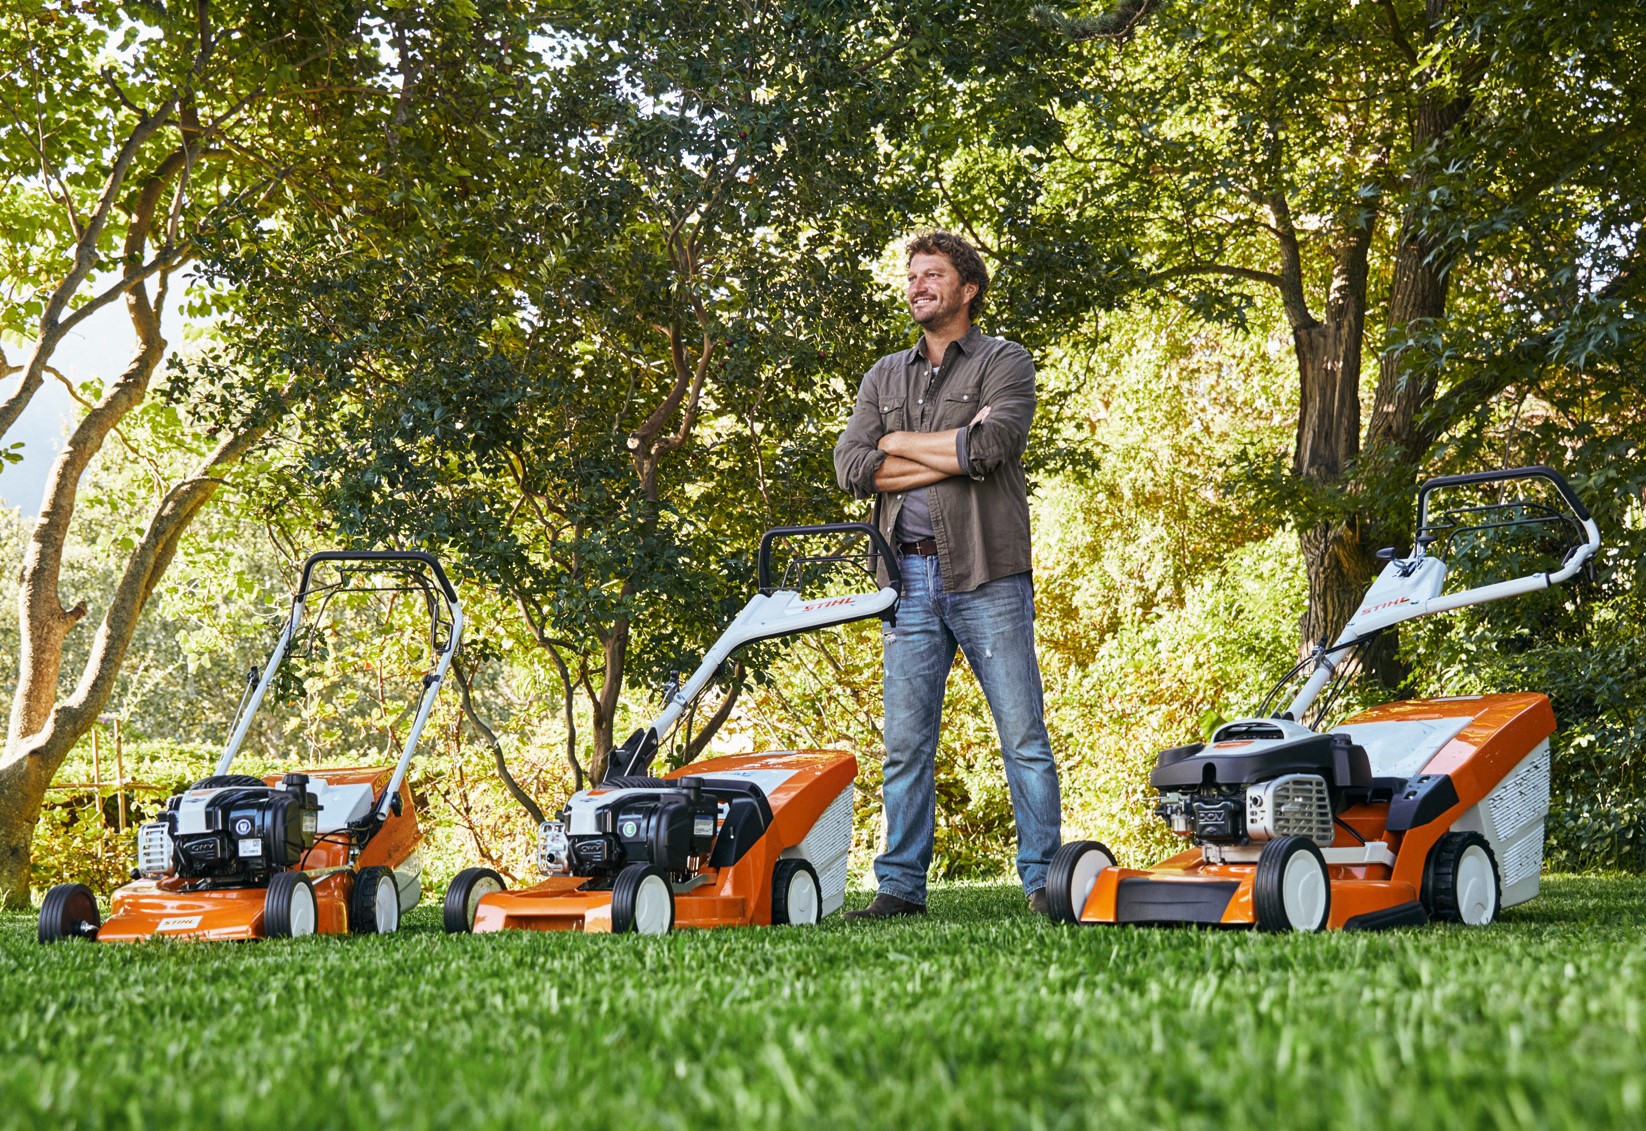 Balmers GM Guide to Buying a Lawn Mower